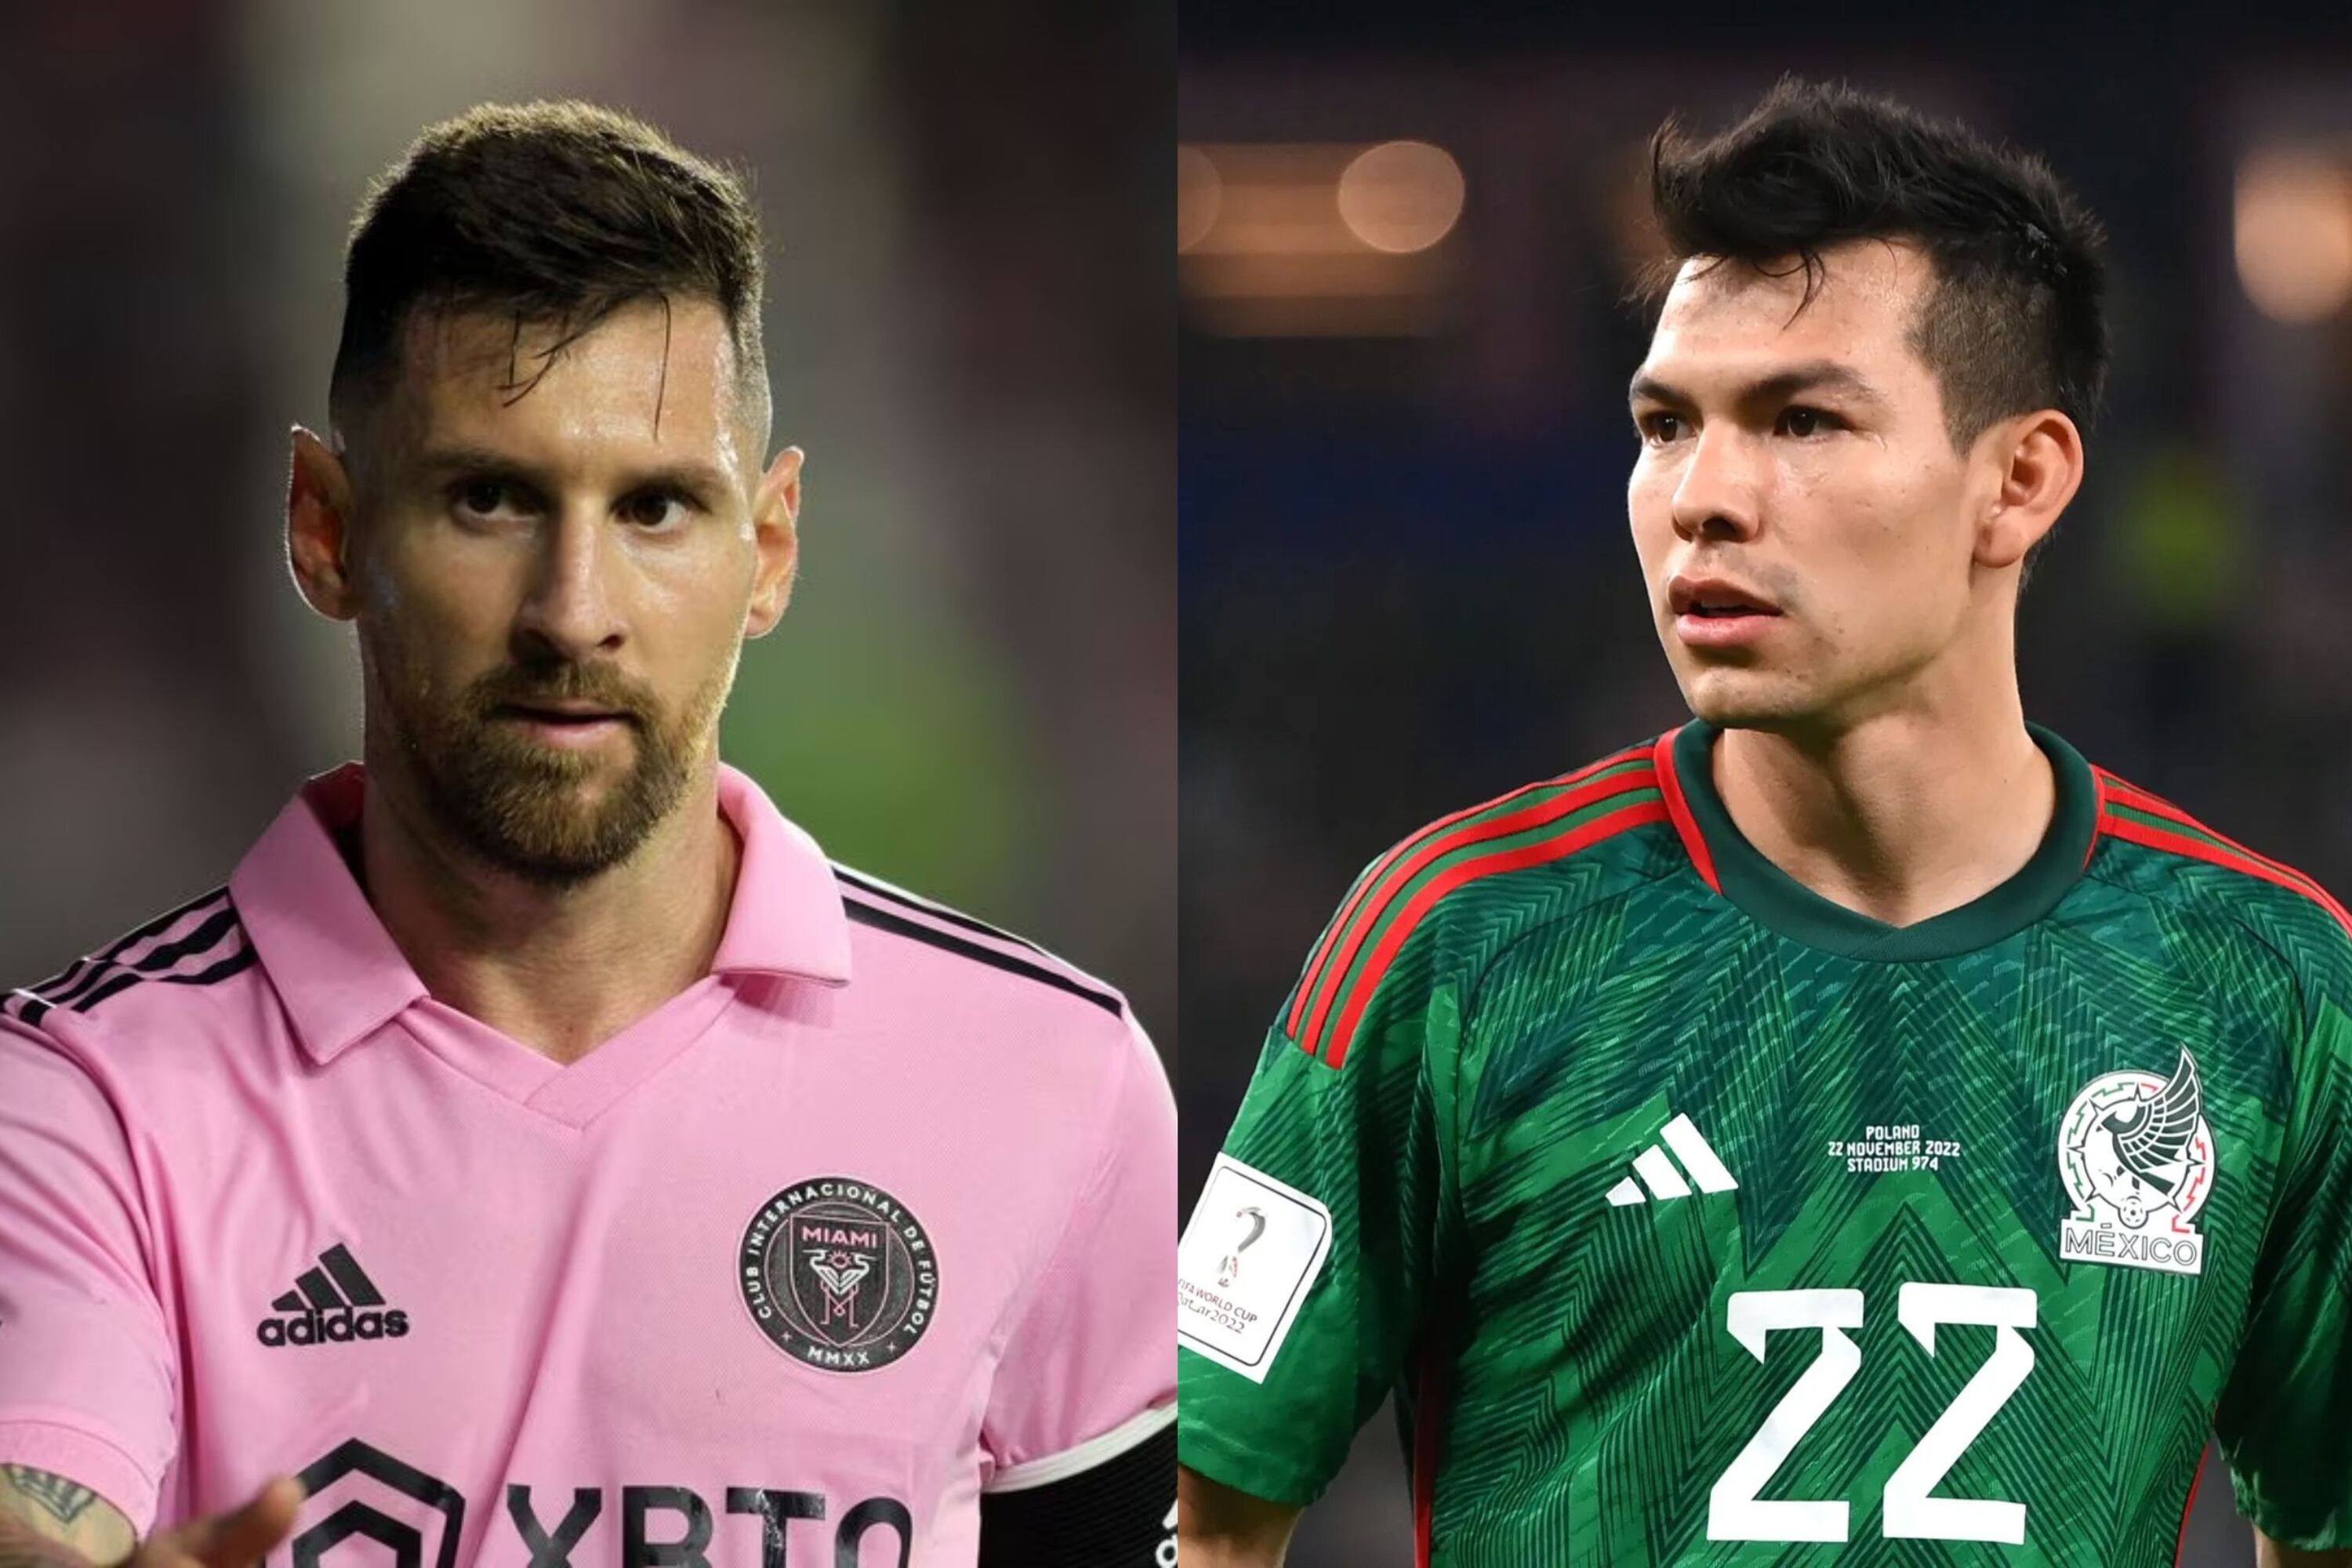 While Messi earns 60 million in Miami, the impressive salary Hirving Lozano could have at LA Galaxy